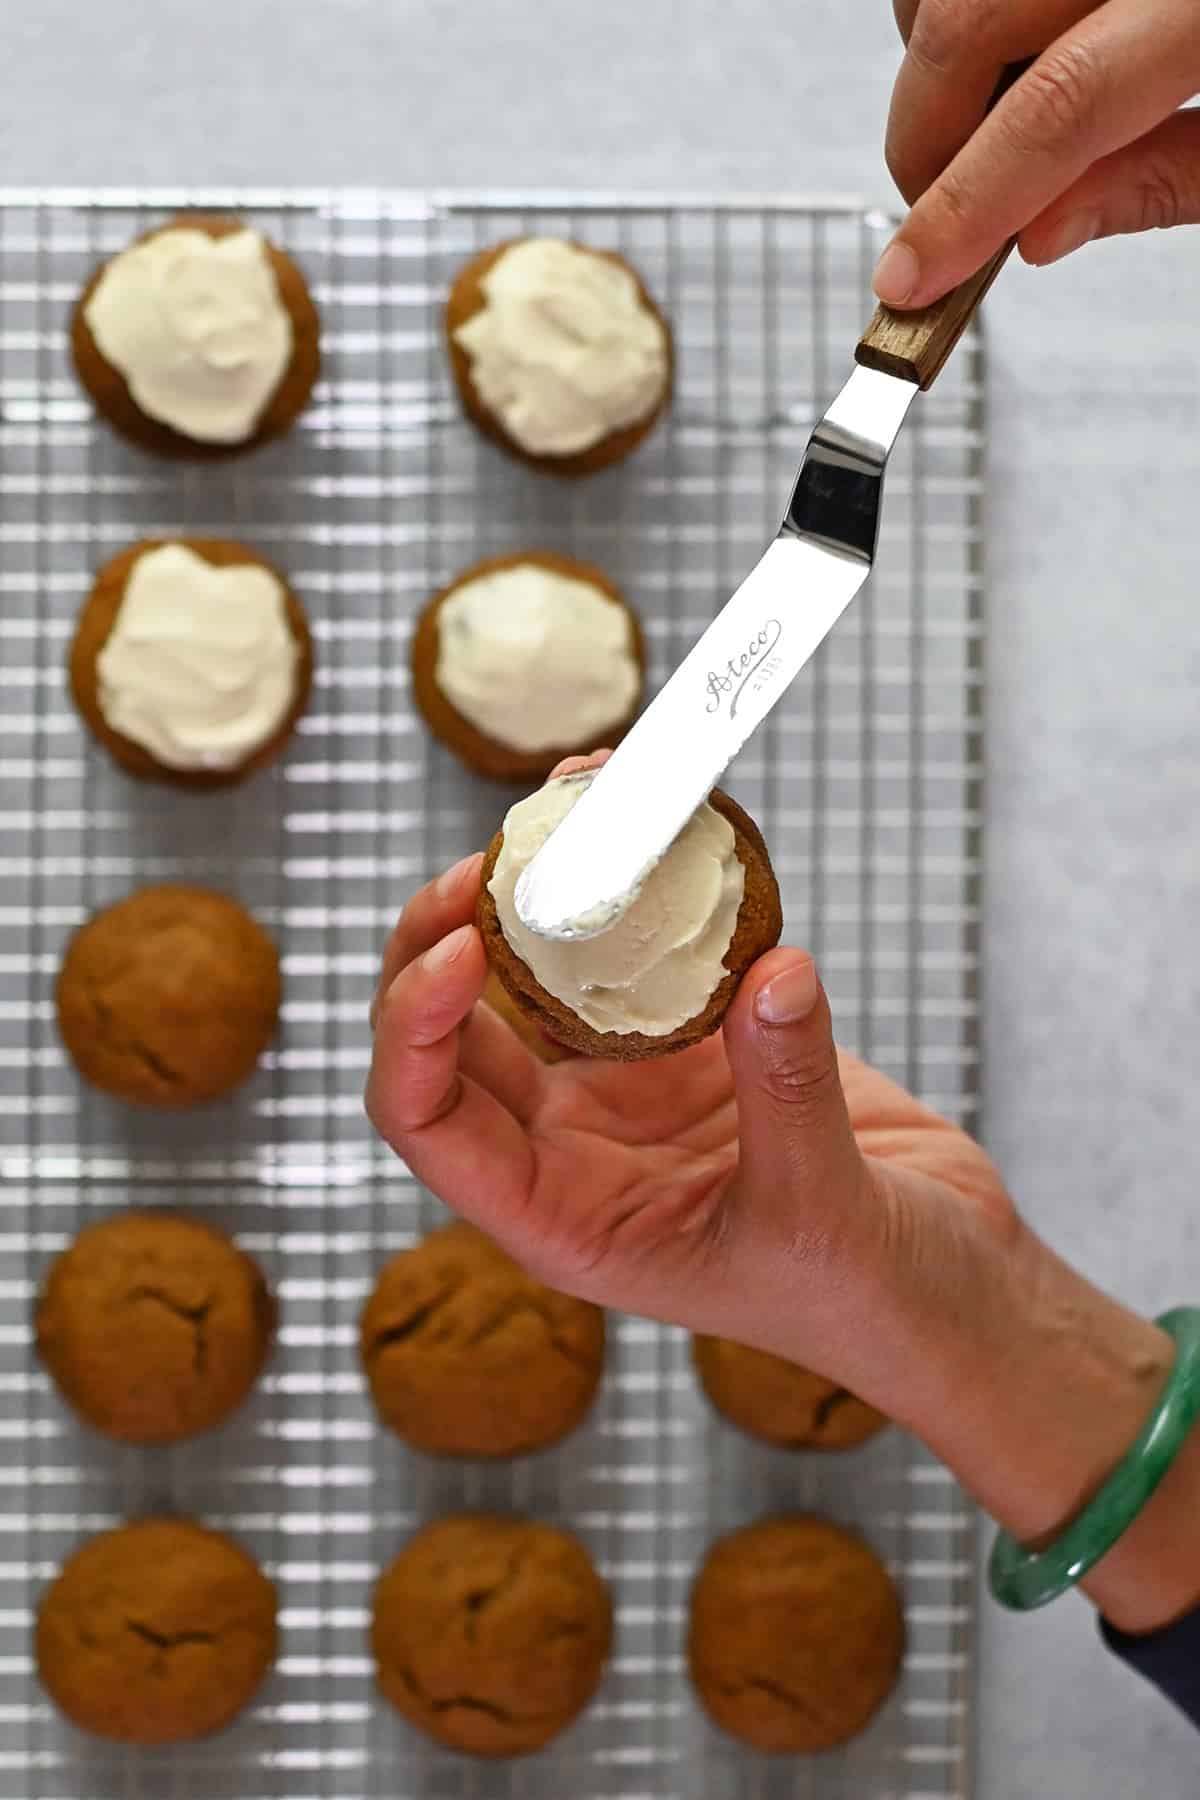 A hand is holding a paleo pumpkin cookie and spreading dairy-free cream cheese frosting on top with a small offset spatula.